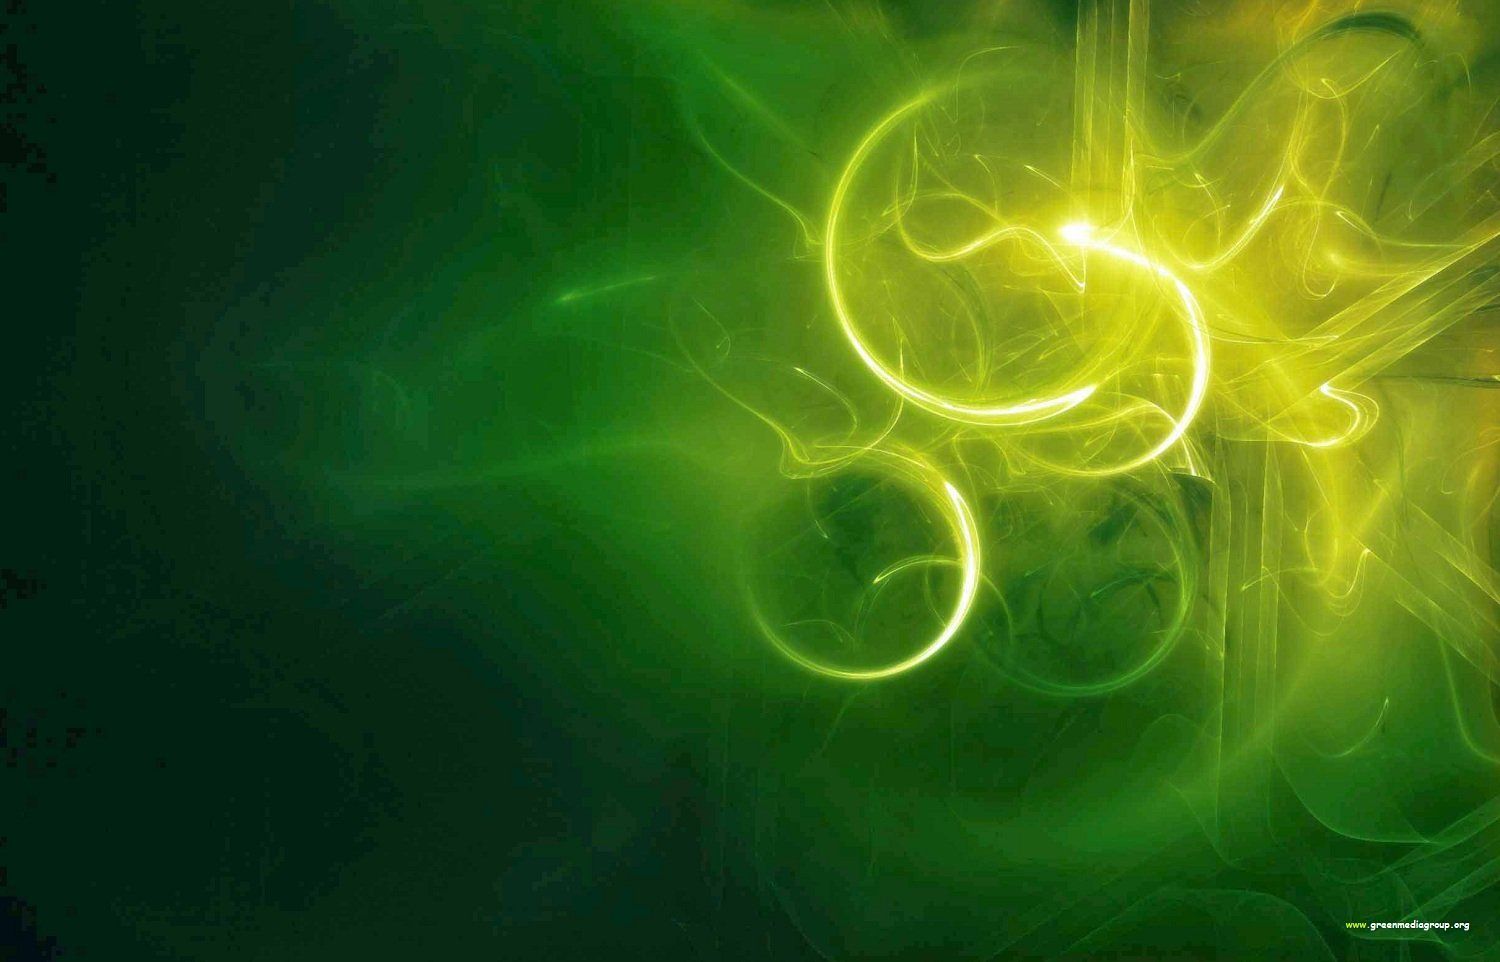 Free download EPIC GREEN AND GOLD BACKGROUNDS [1500x962] for your Desktop, Mobile & Tablet. Explore Green and Gold Wallpaper. Green and Black Wallpaper, Green Wallpaper for Walls, Gold and Black Wallpaper